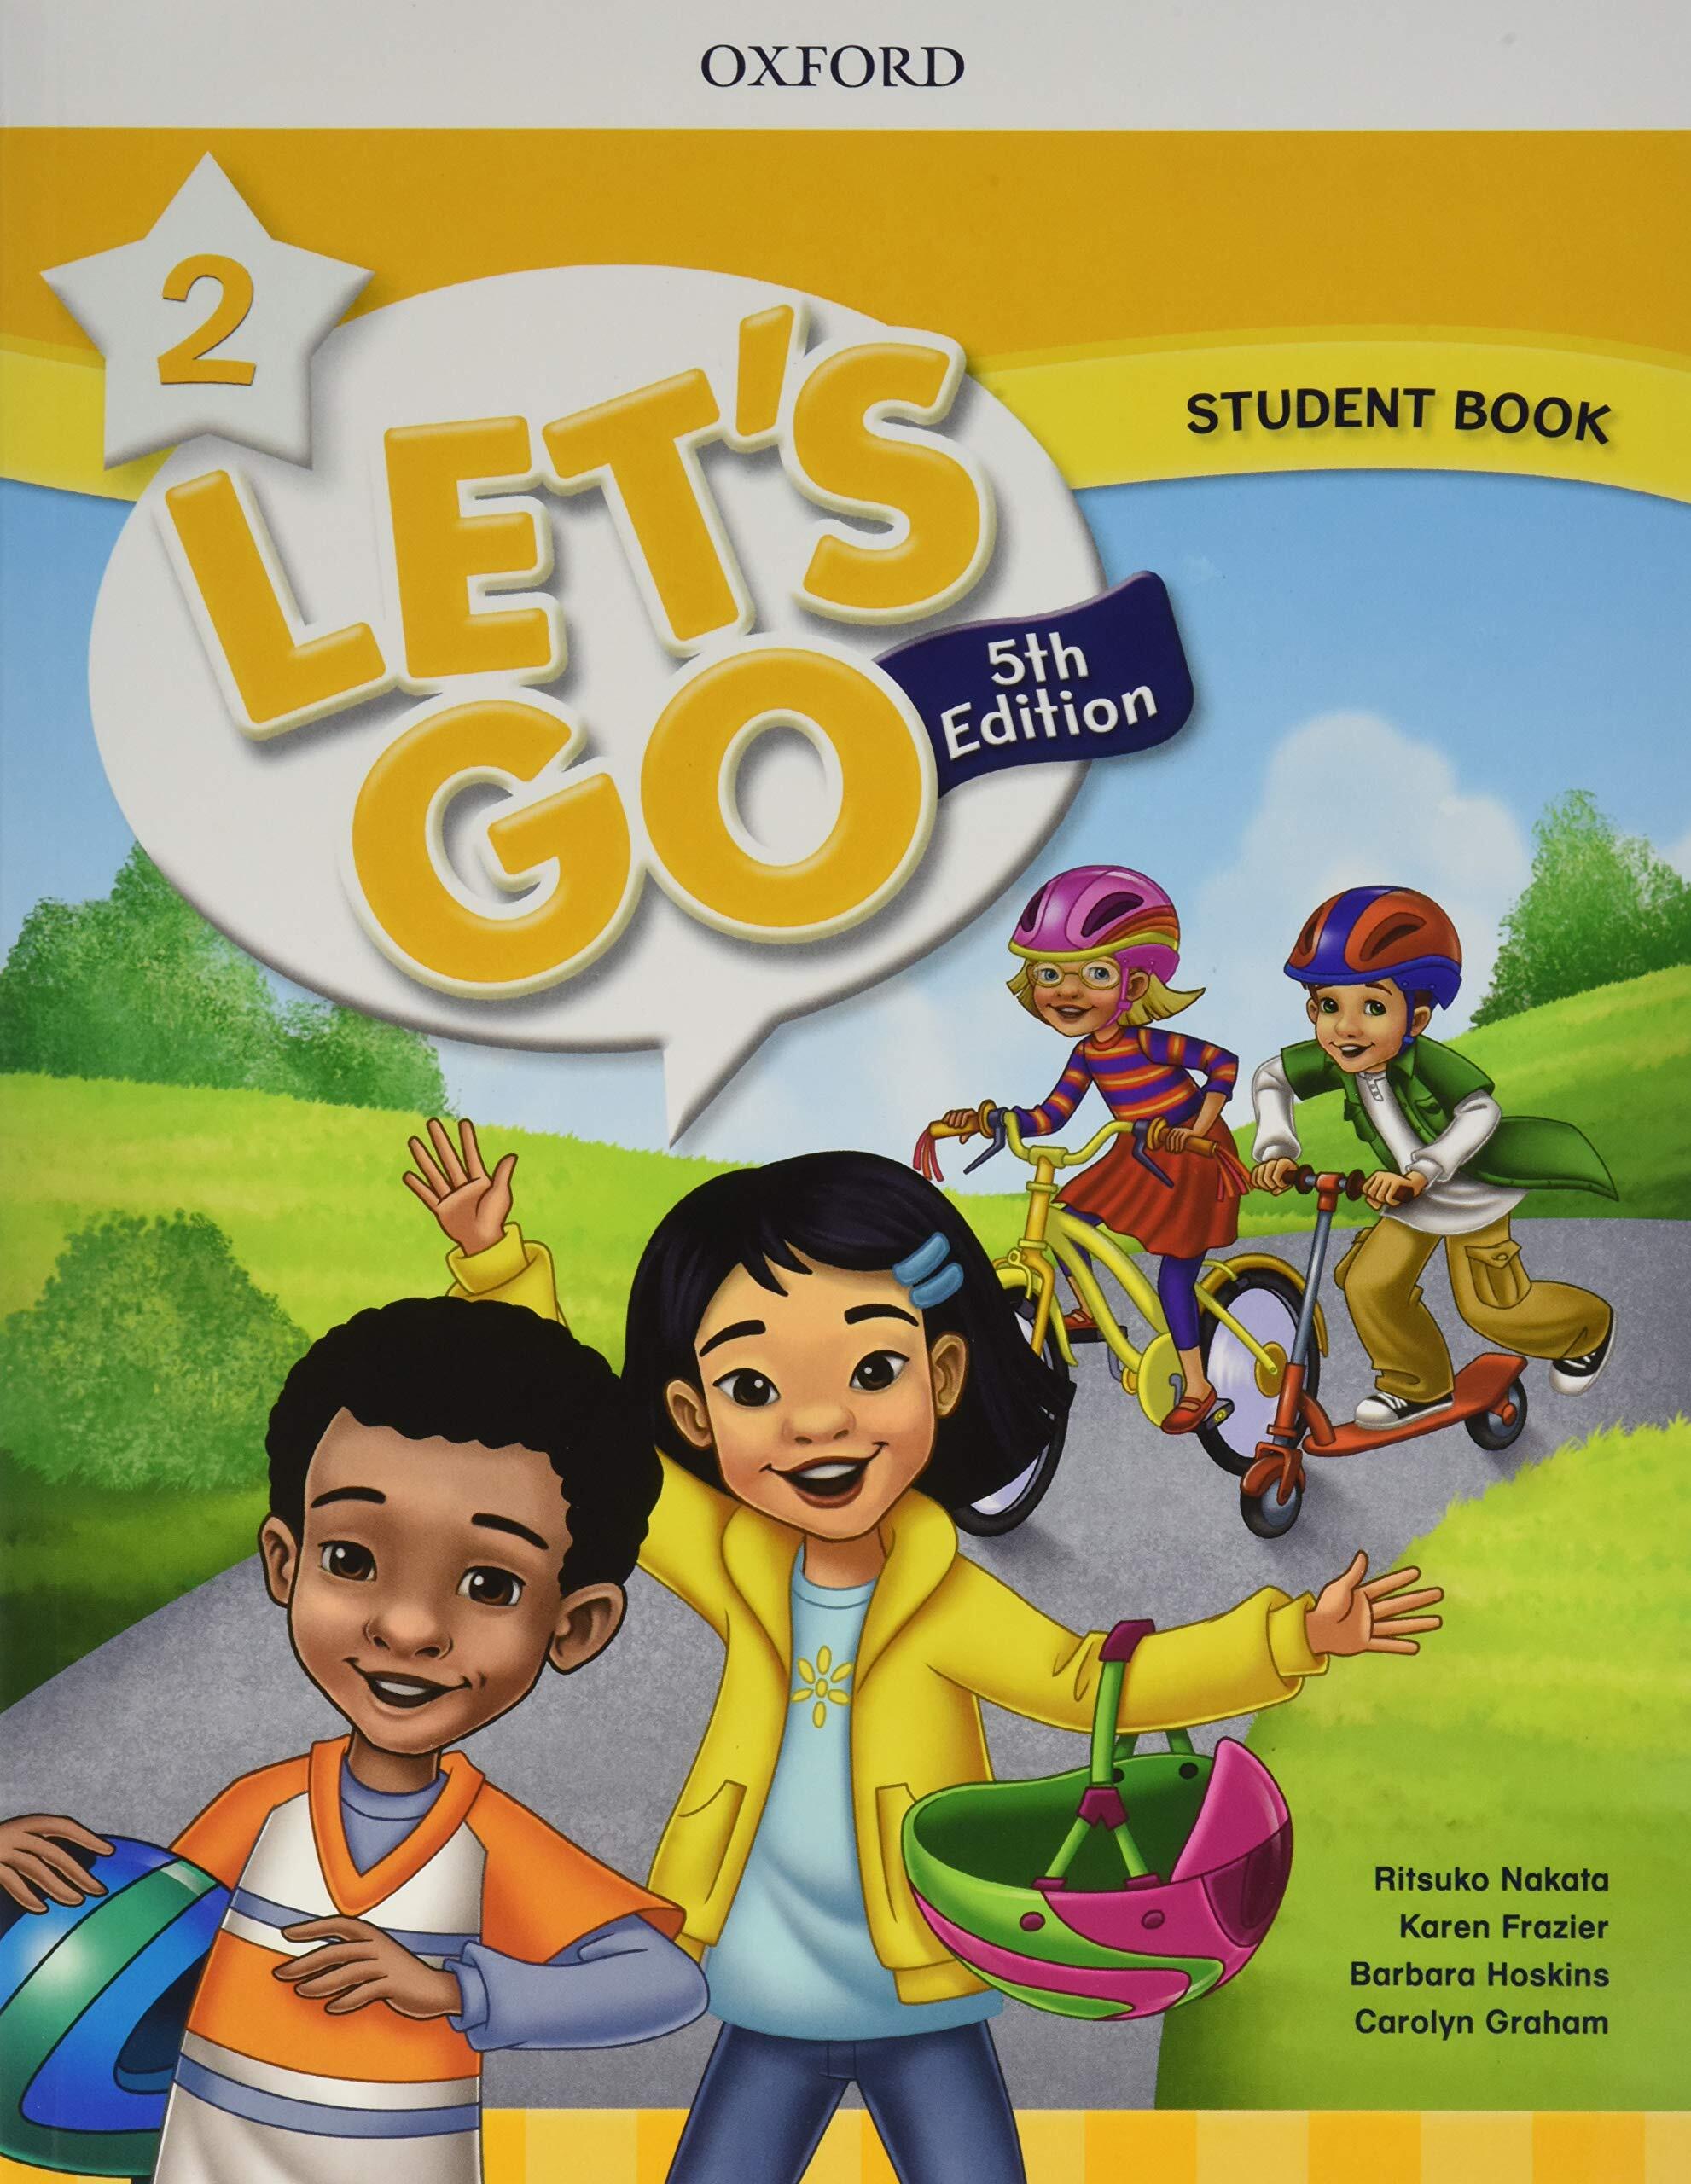 Let its go. Let's go 5th Edition 1. Let's go 5th Edition 3. Книга Lets go. Oxford student's book по уровням.